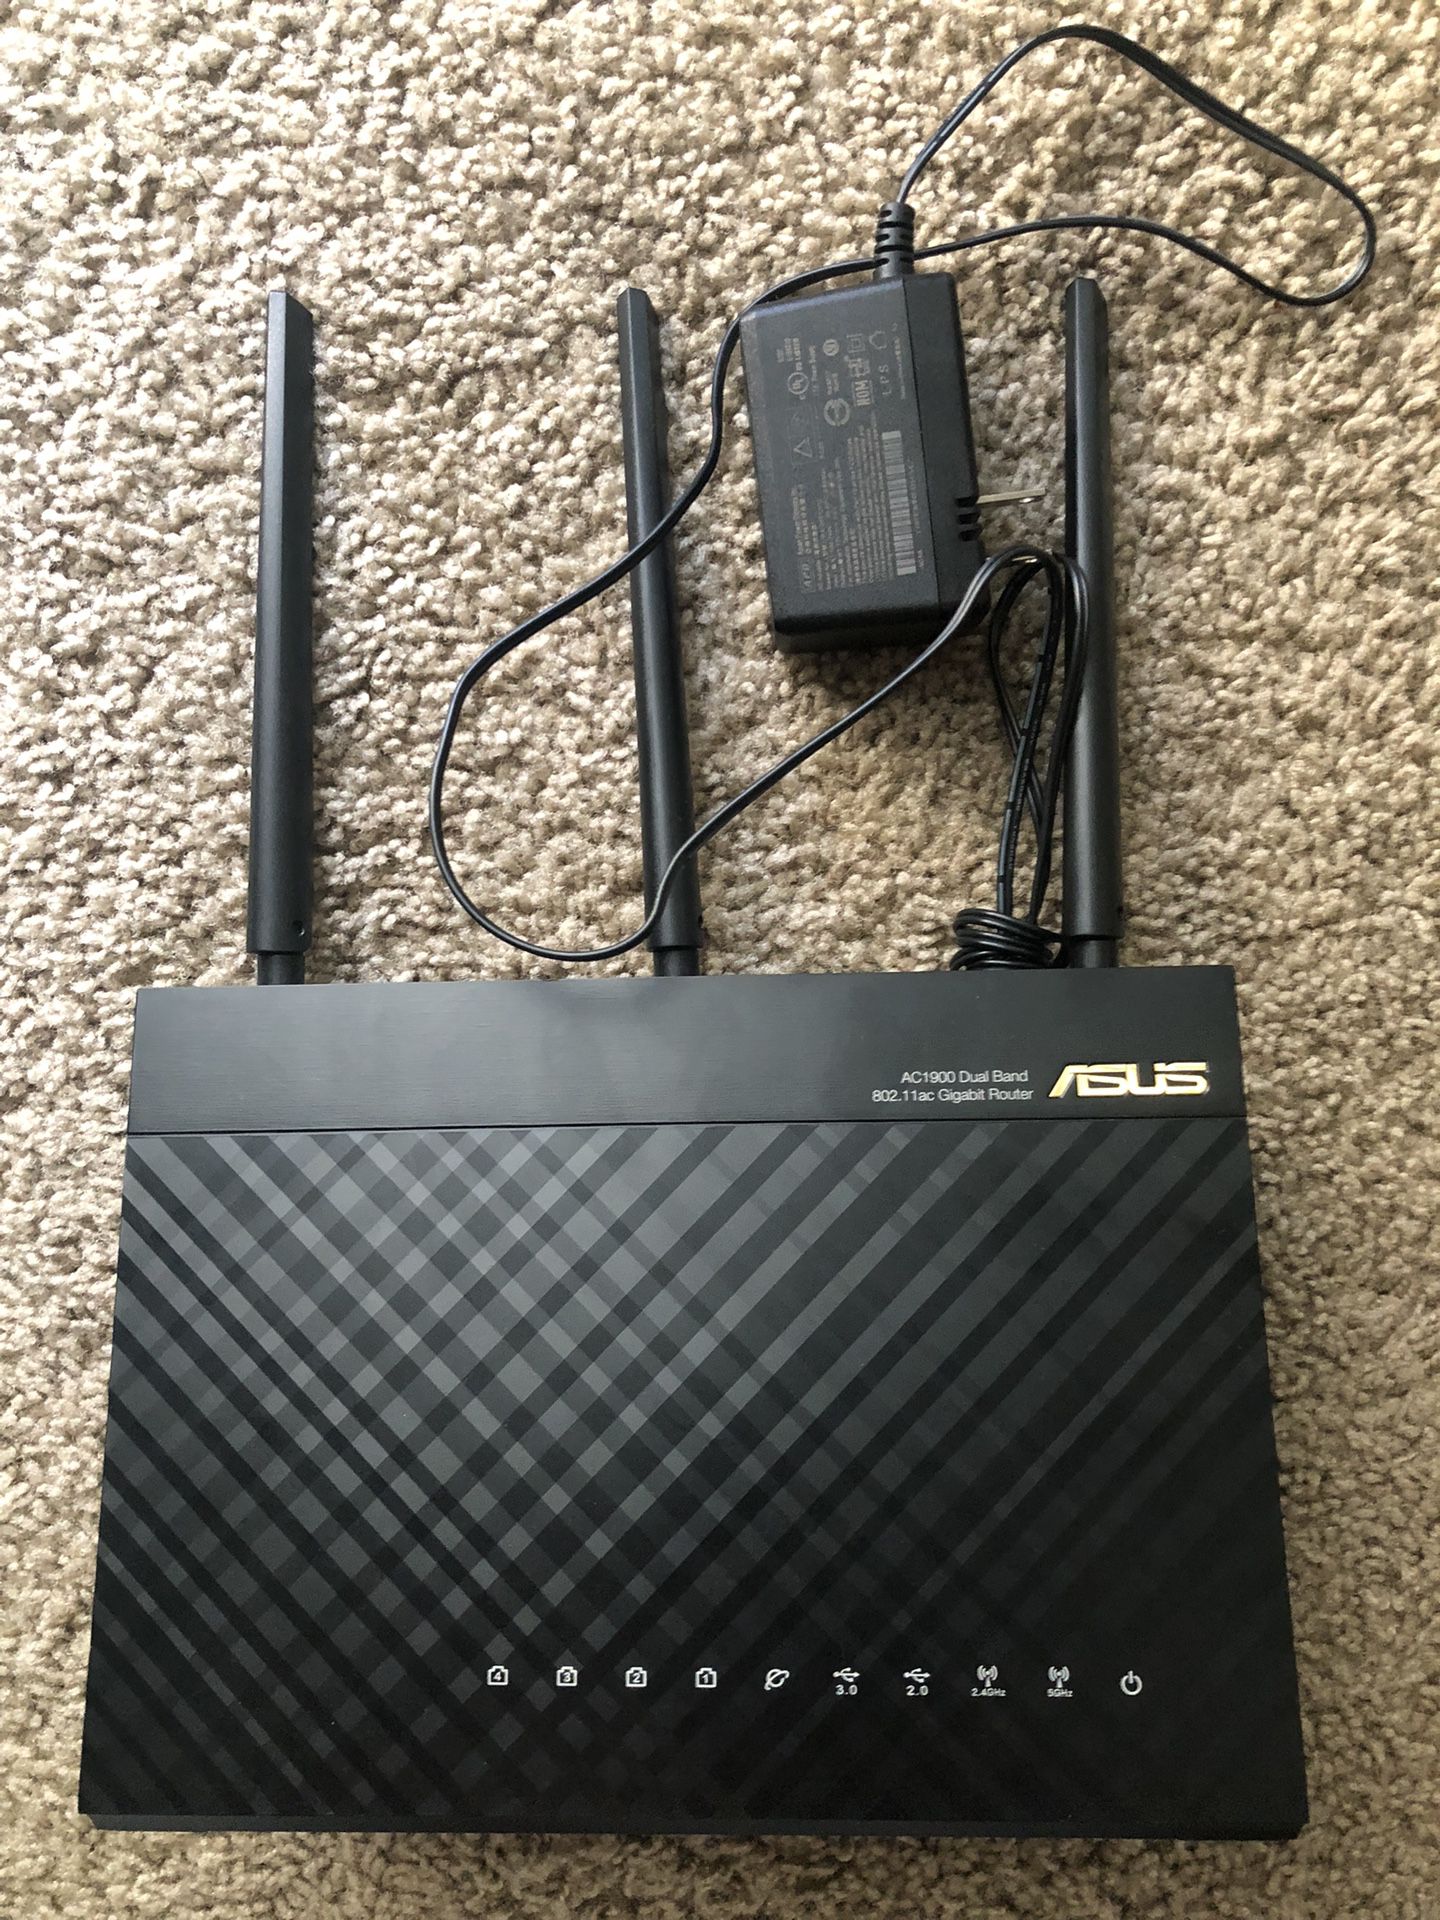 Asus Wireless Router 